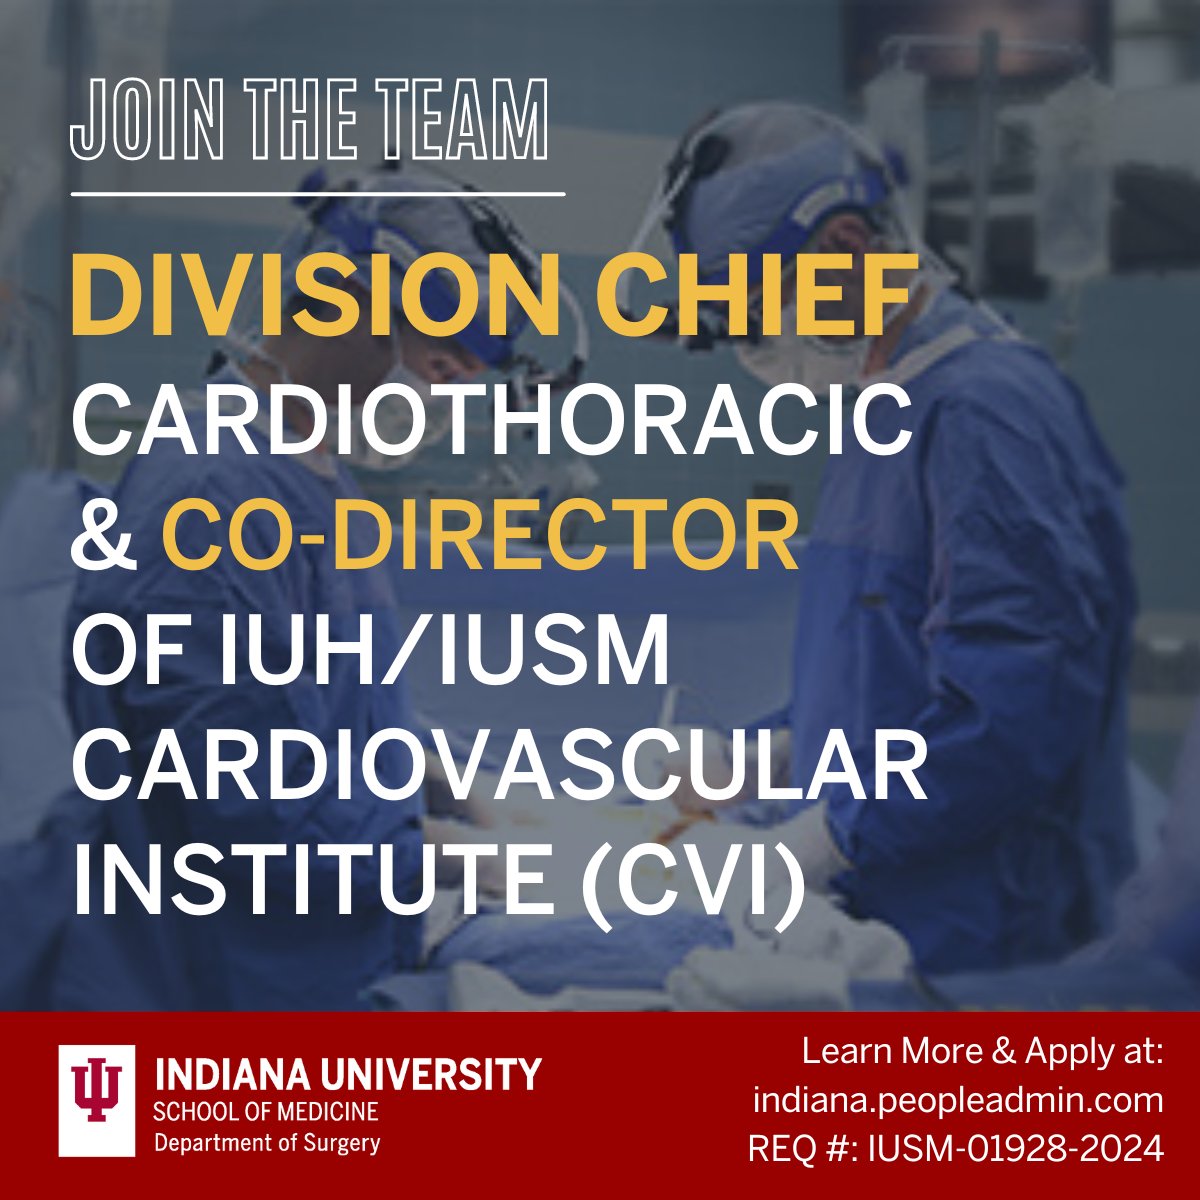 📢Major Leadership Opportunity in Cardiothoracic! Come join the team at Indiana University School of Medicine (IUSM) as the Division Chief of Cardiothoracic and Co-Director of the IUH/IUSM Cardiovascular Institute (CVI). We are seeking a visionary leader to guide our faculty in…